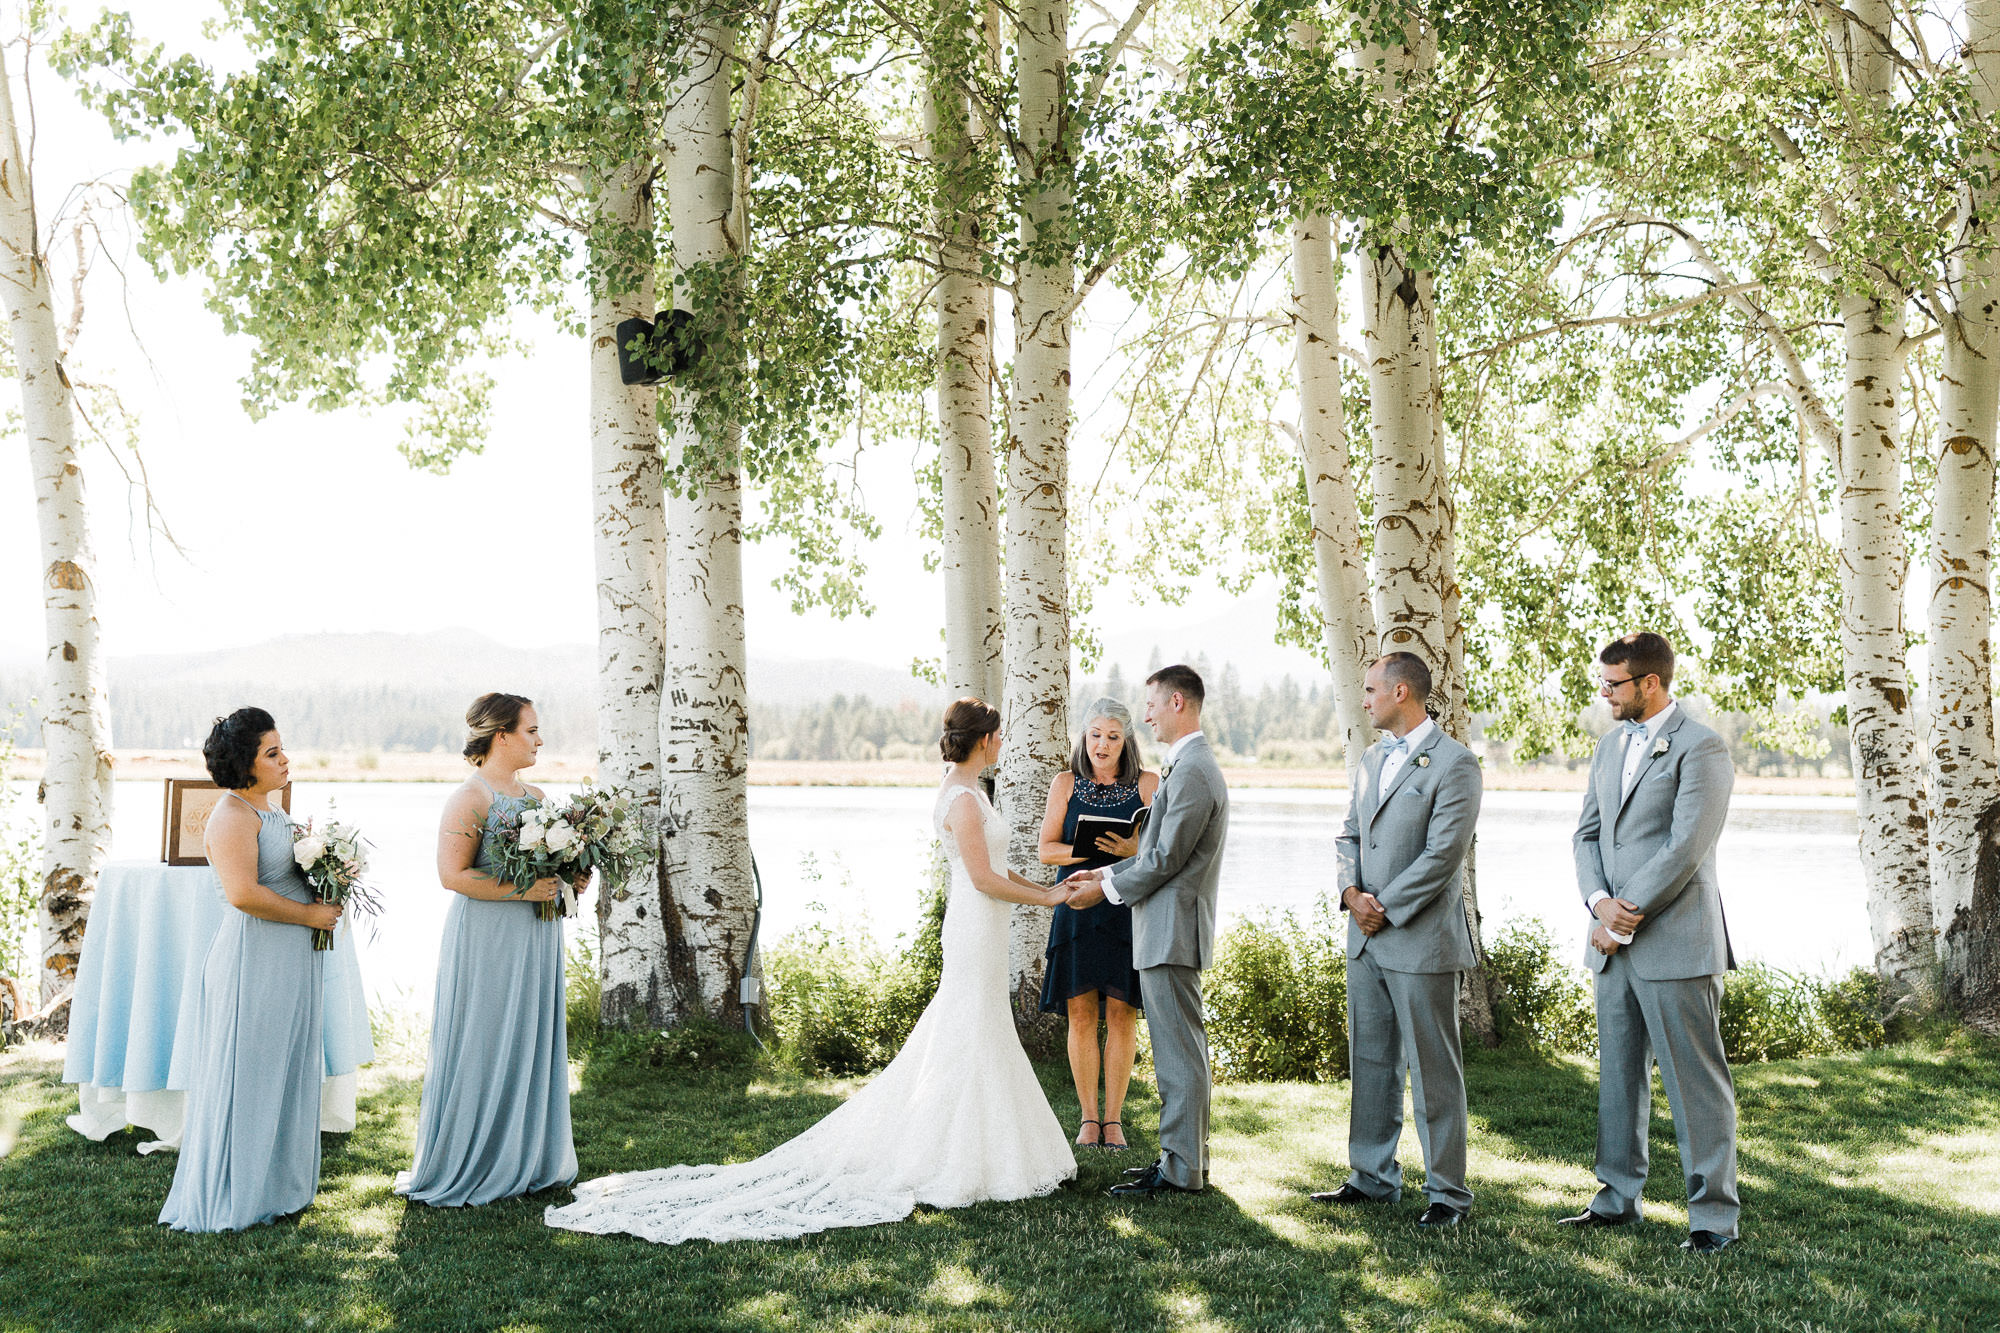 An outdoor wedding ceremony at Black Butte Ranch in Central Oregon